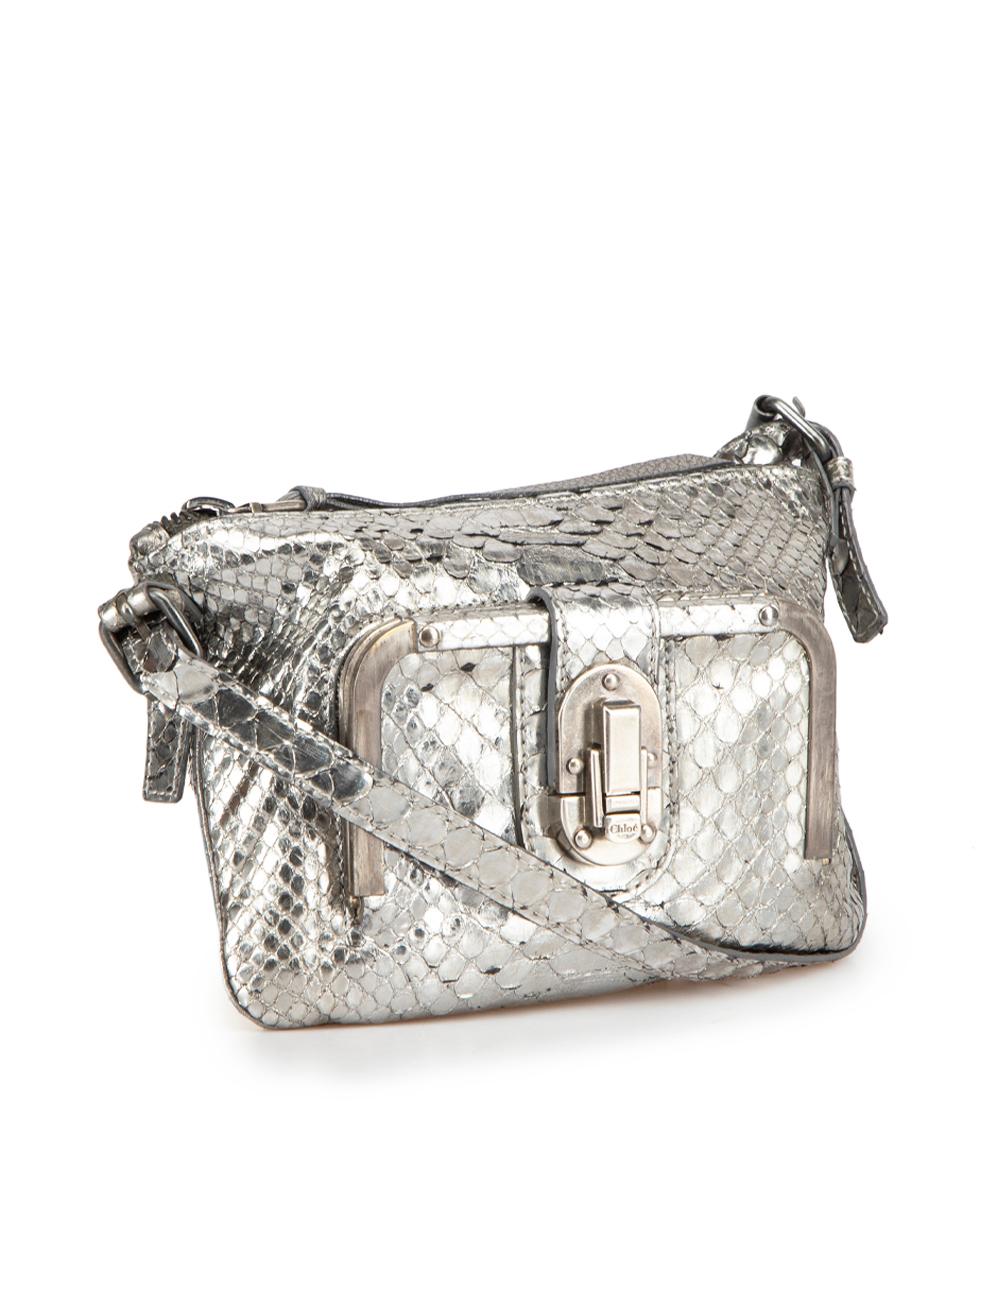 CONDITION is Good. Minor wear to bag is evident. Light wear to the snakeskin with peeling of the grain, the hardware has also started to tarnish on this used Chloé designer resale item. This bag comes with dust bag.



Details


Silver

Python